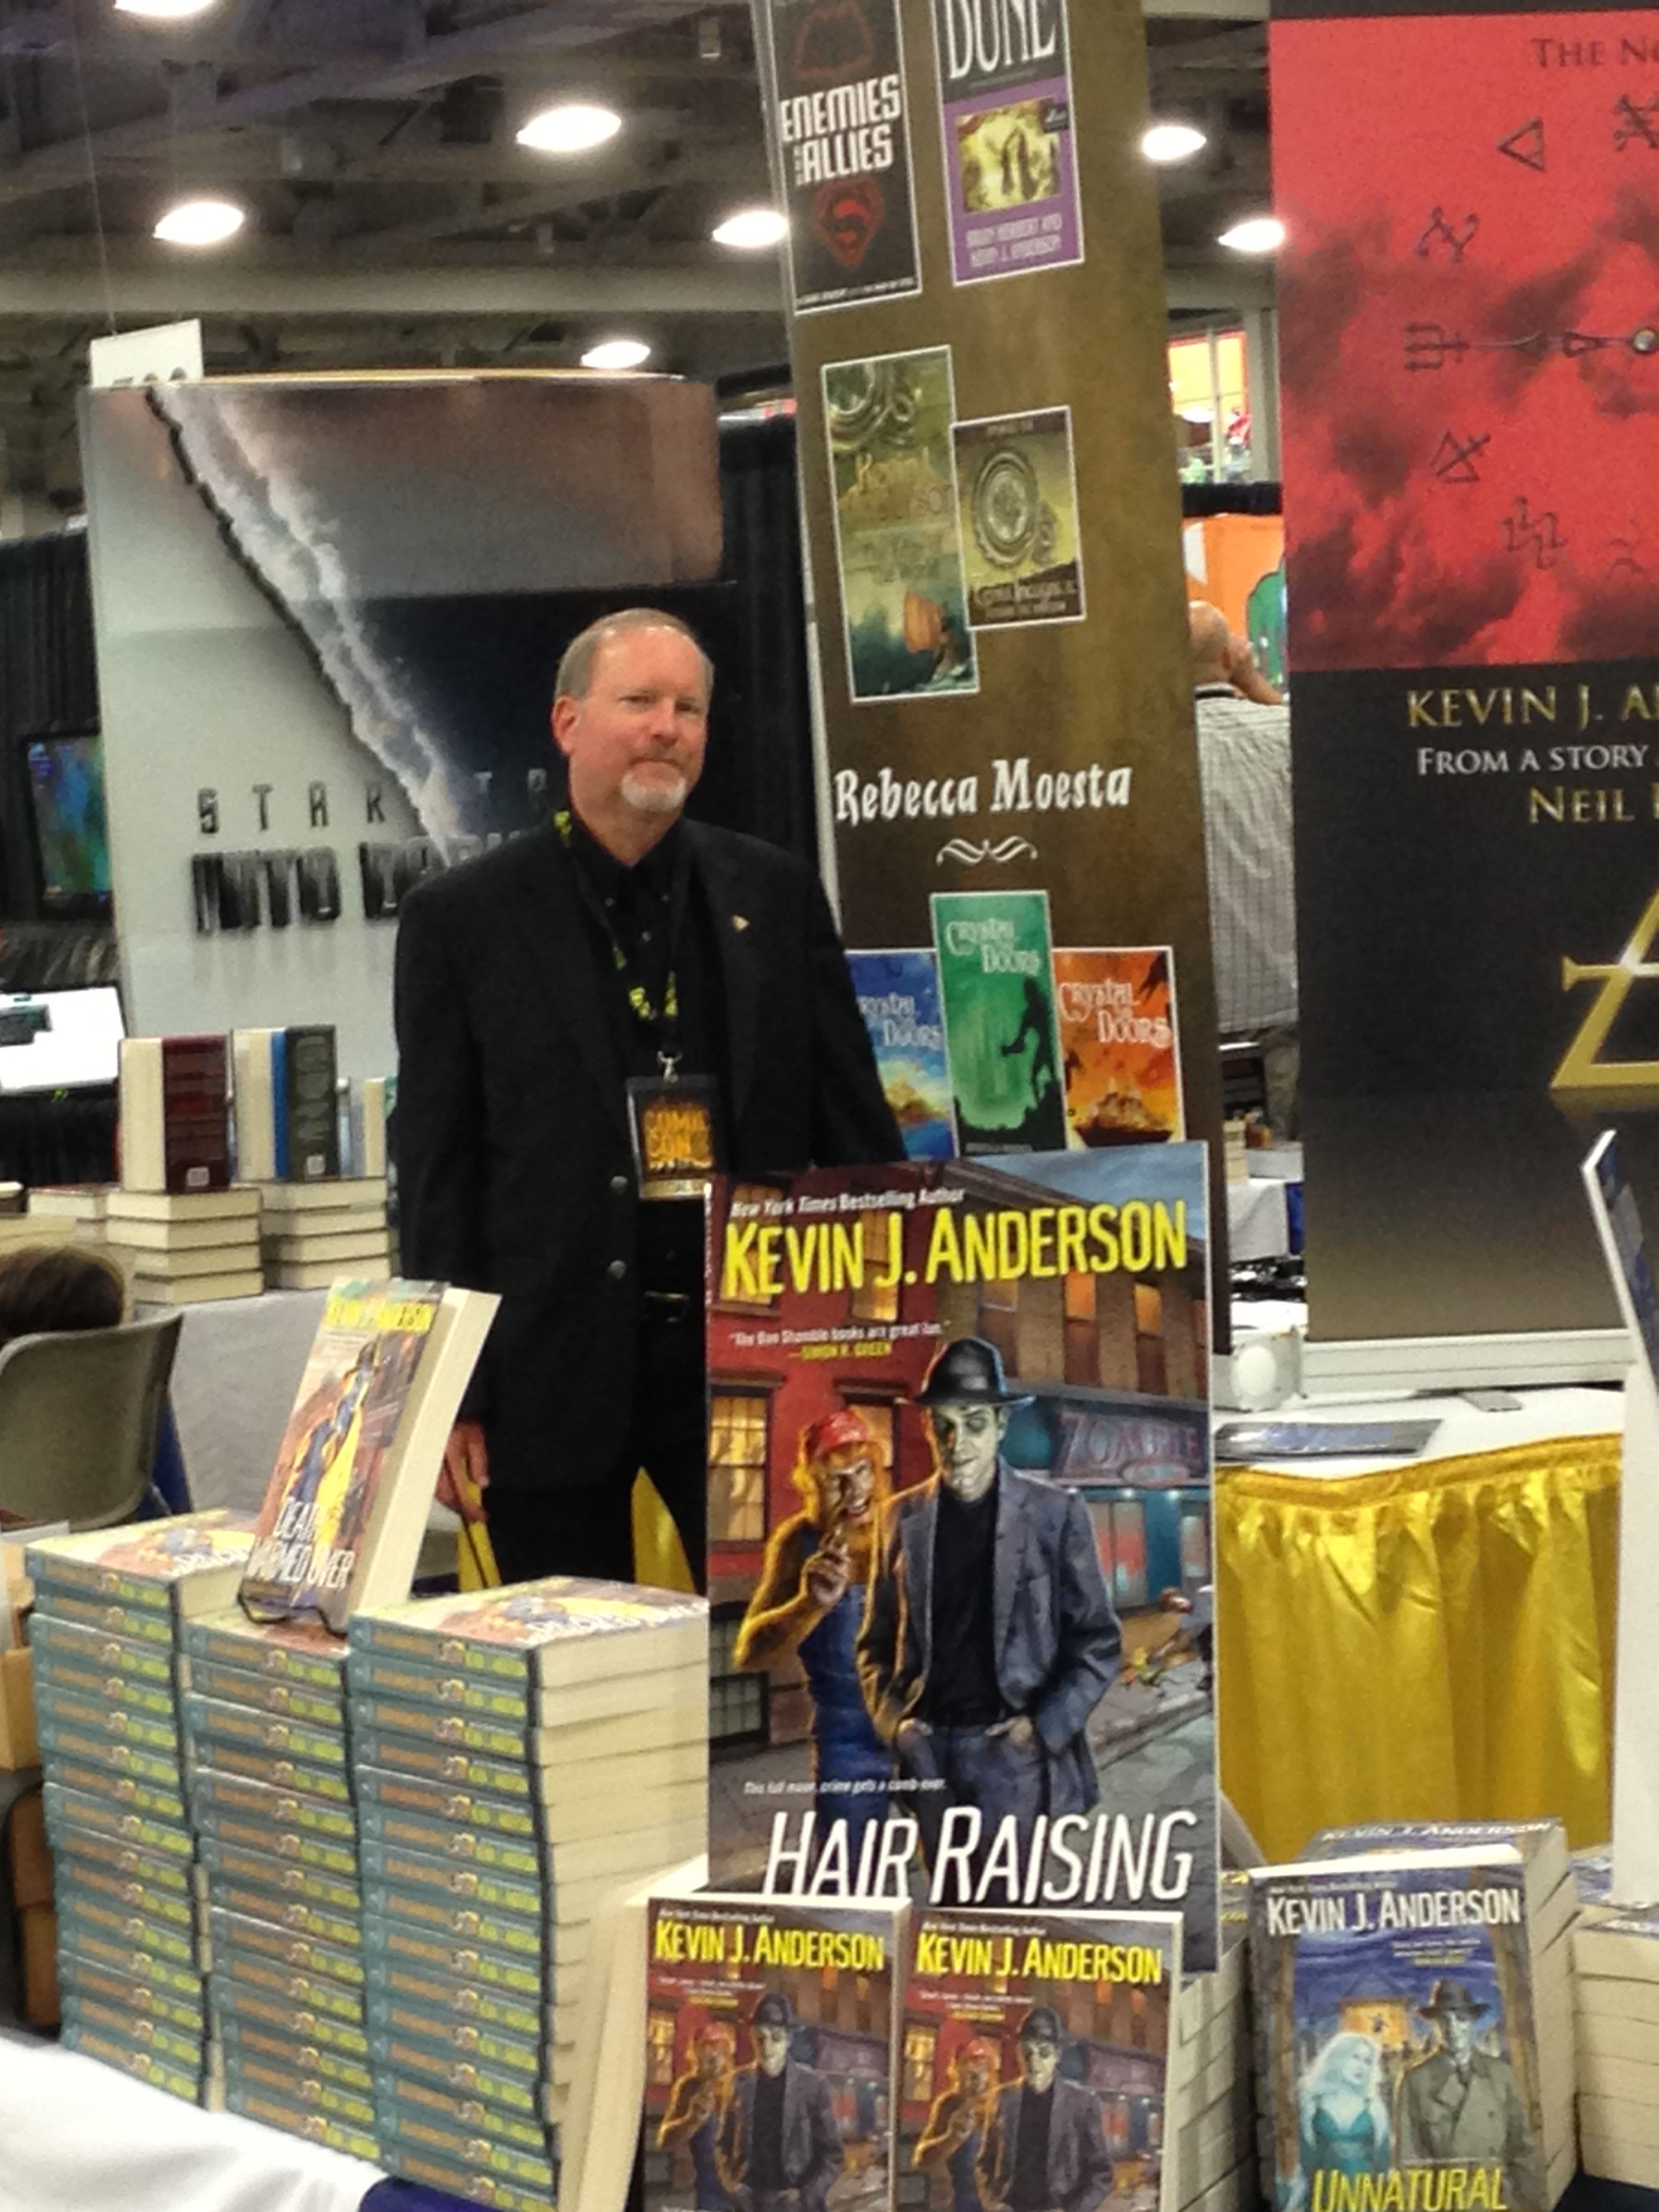 DragonCon and Salt Lake City Comic Con The Official Dune Website